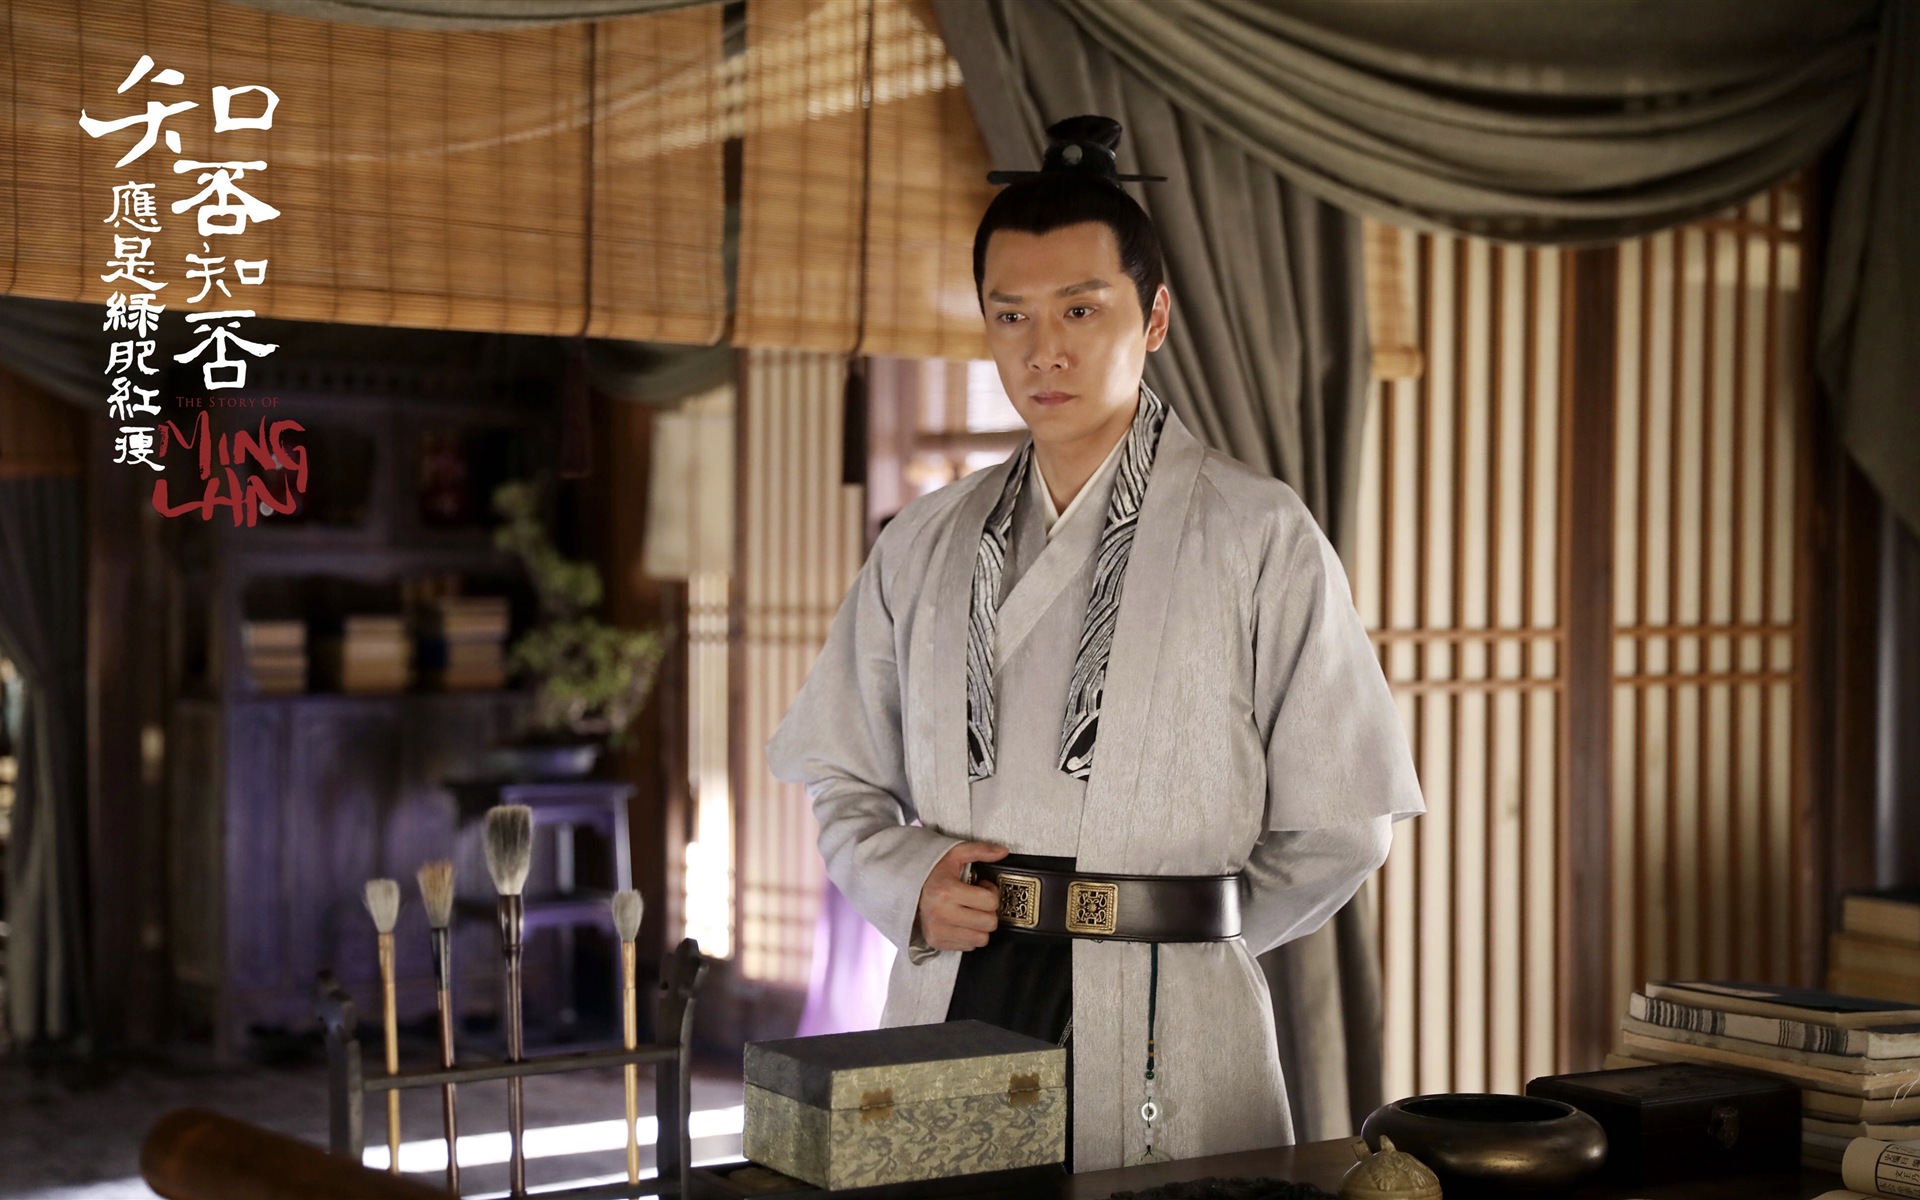 The Story Of MingLan, TV series HD wallpapers #49 - 1920x1200